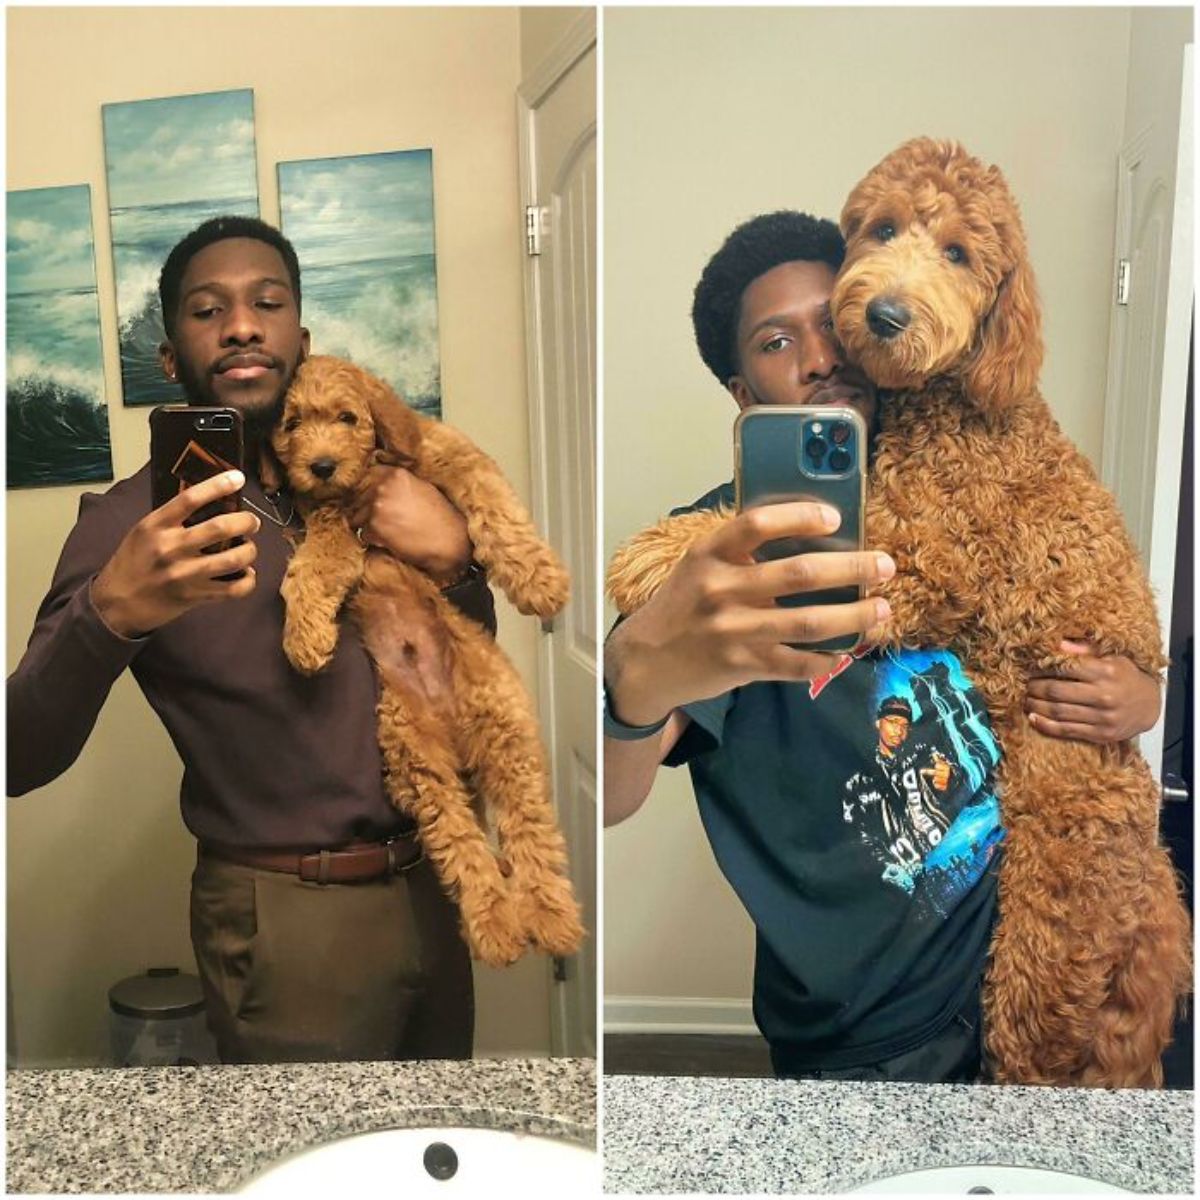 1 photo of a man with a brown poodle puppy and 1 photo of the same man with the grown up dog